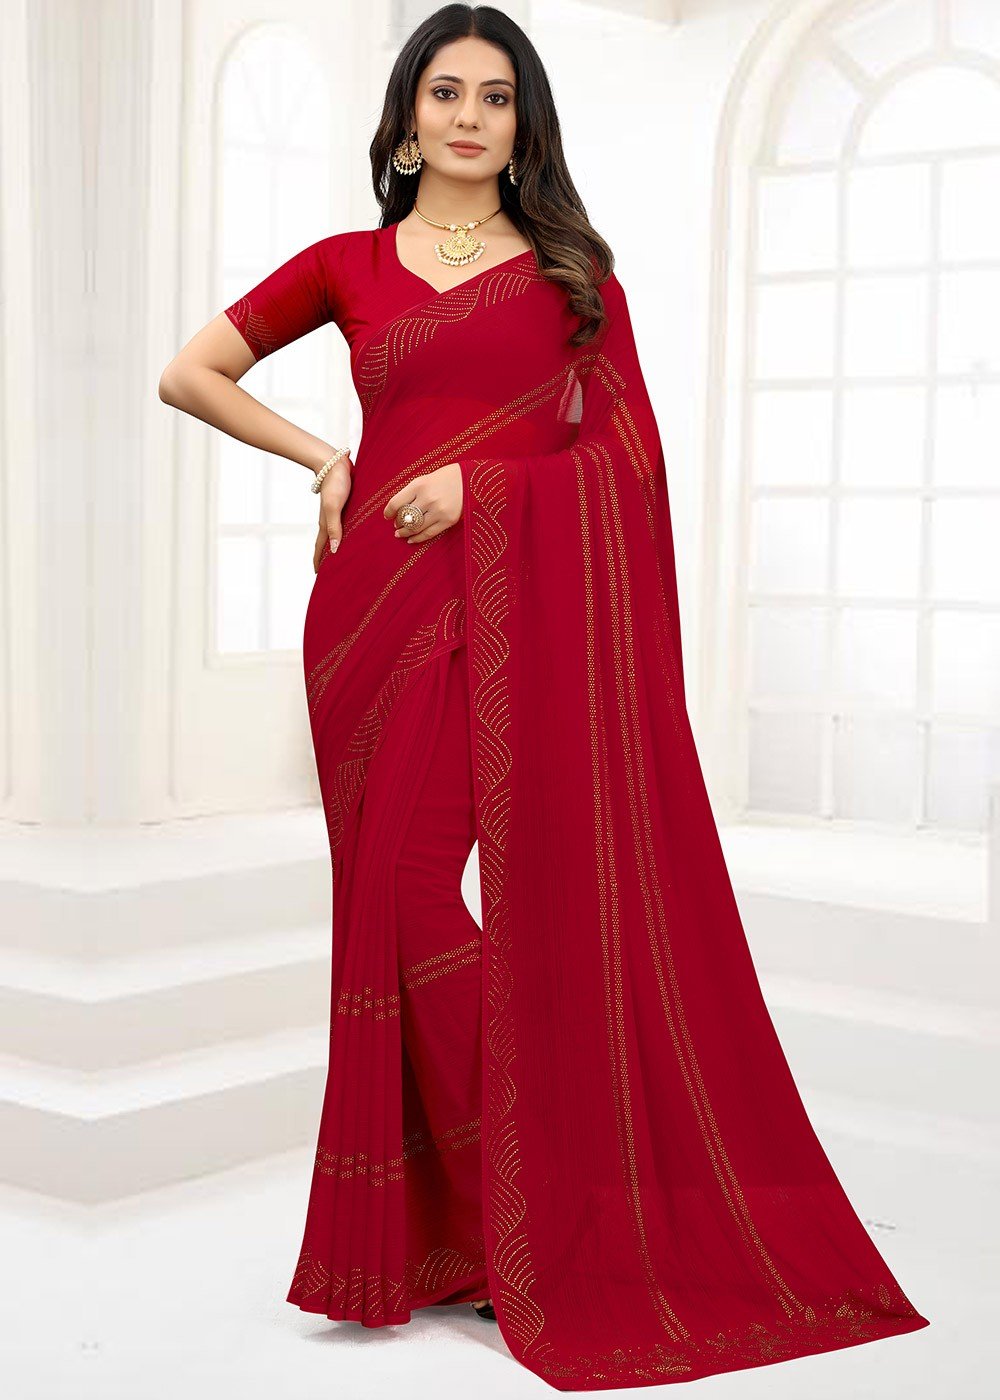 Red Chiffon Saree With Embroidery Work And Fancy Border - Vishal Prints -  3968159